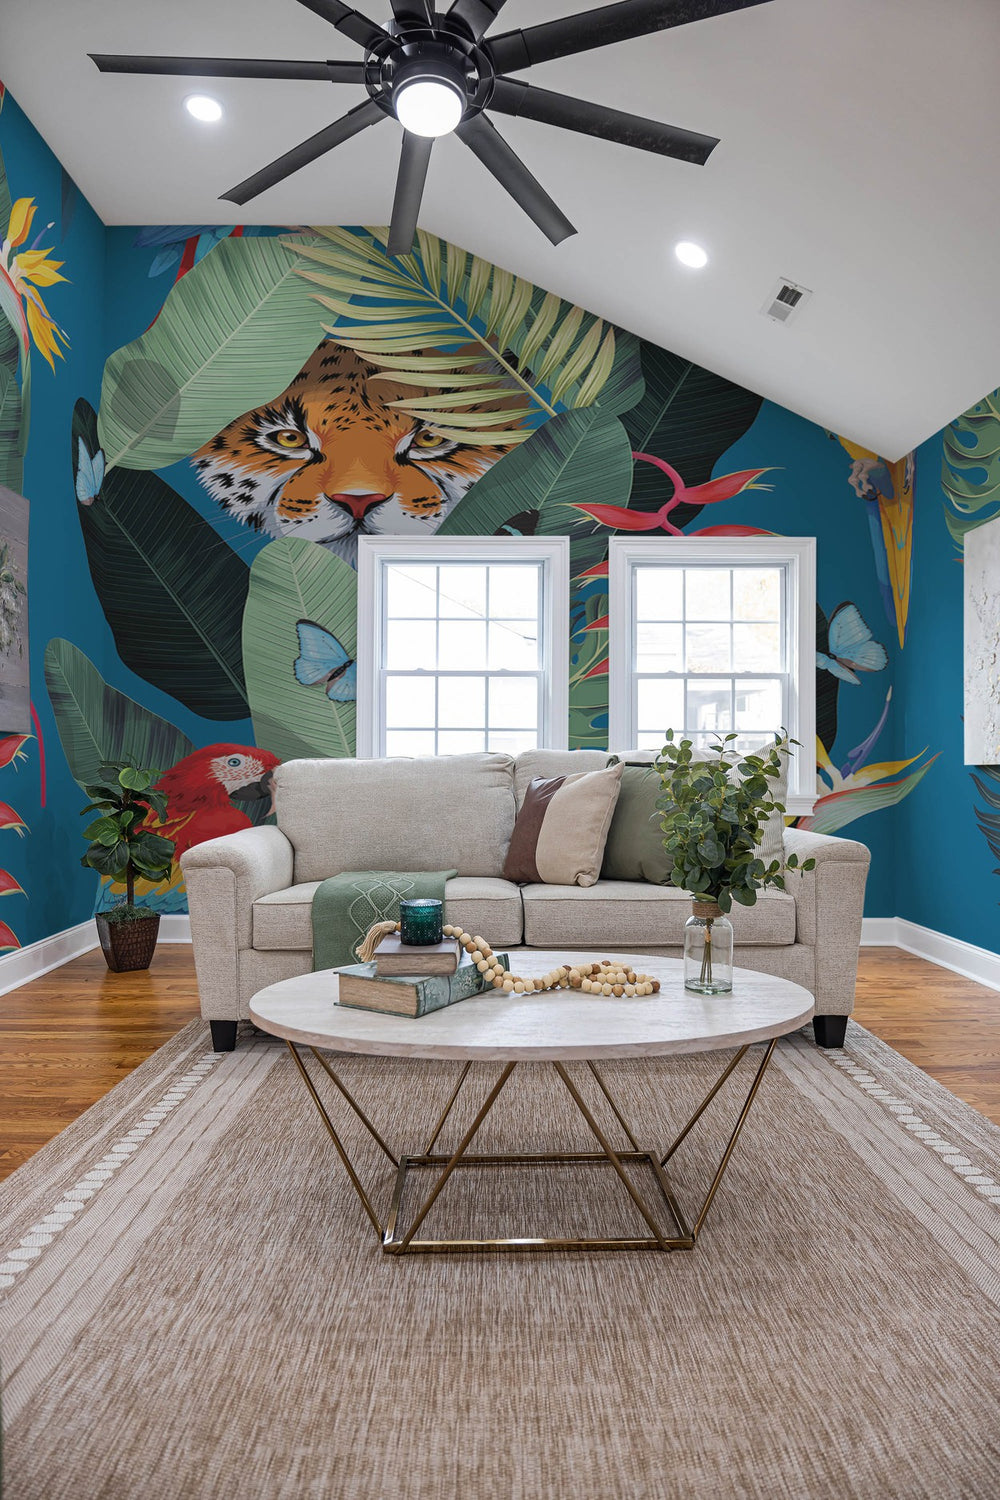 A vibrant living room interior with a large wall mural featuring a tropical jungle theme complete with a prominent tiger illustration.‚Äù